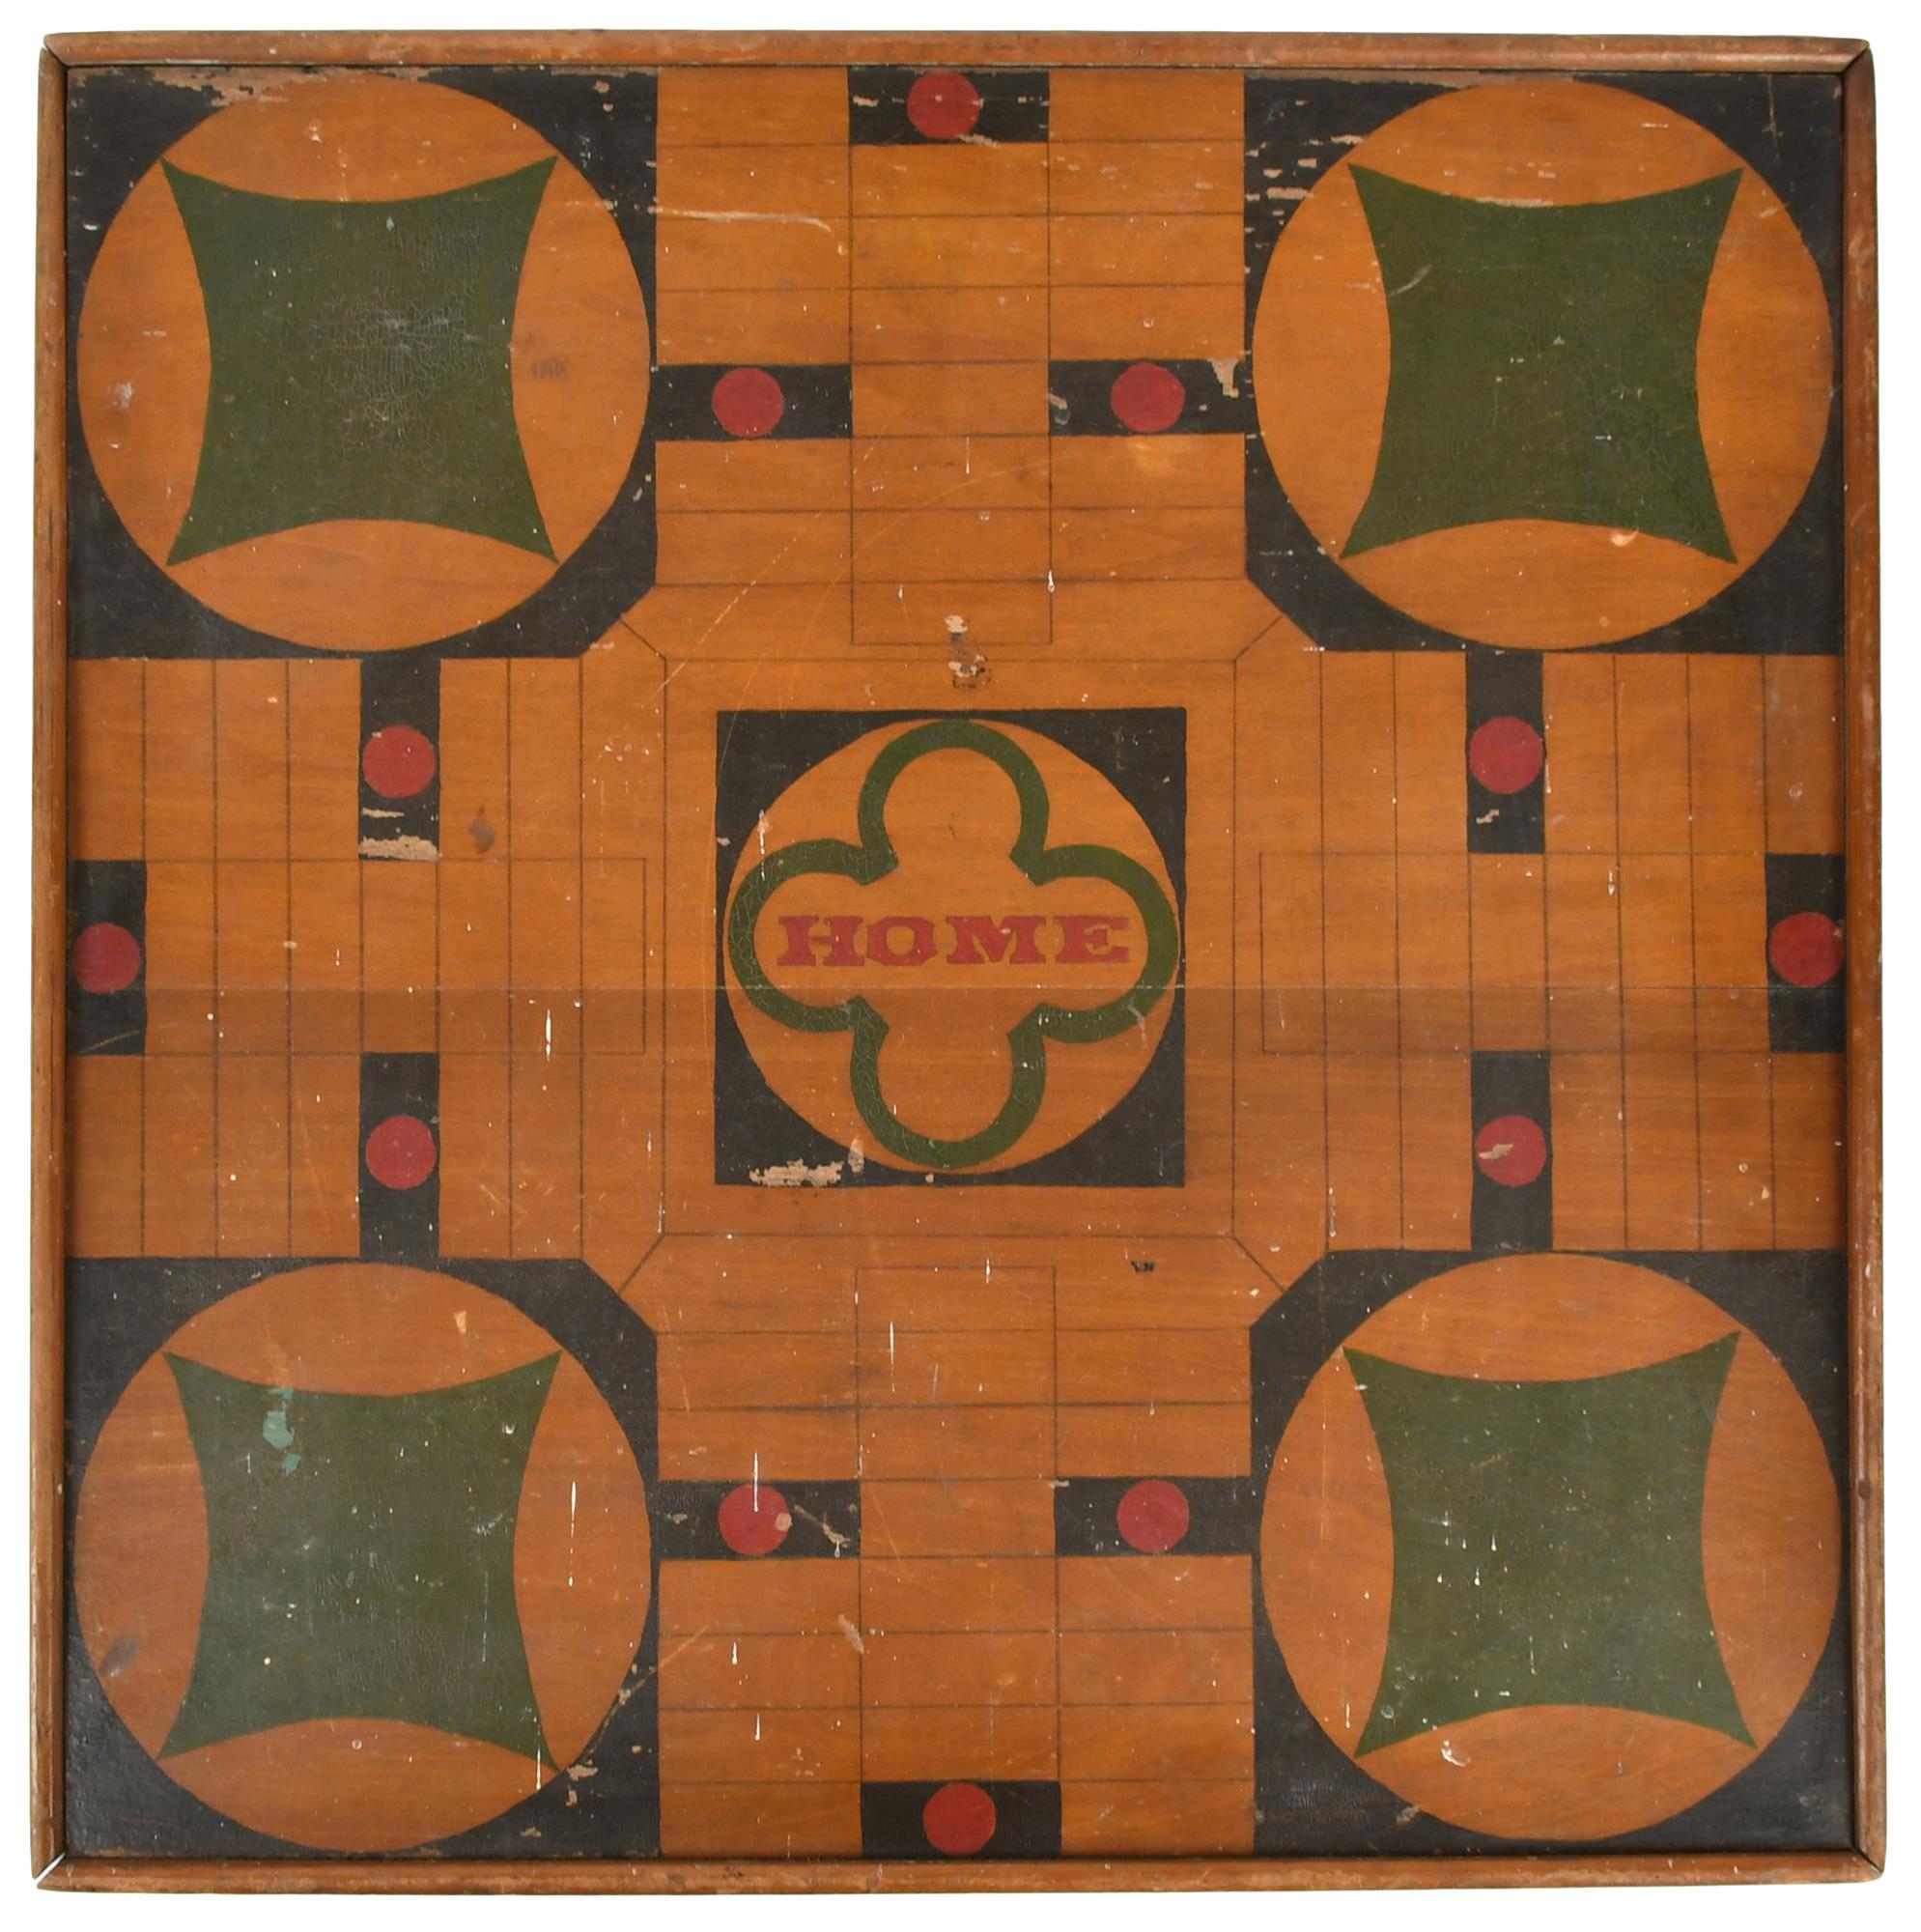 EARLY DOUBLE SIDED PAINTED GAME